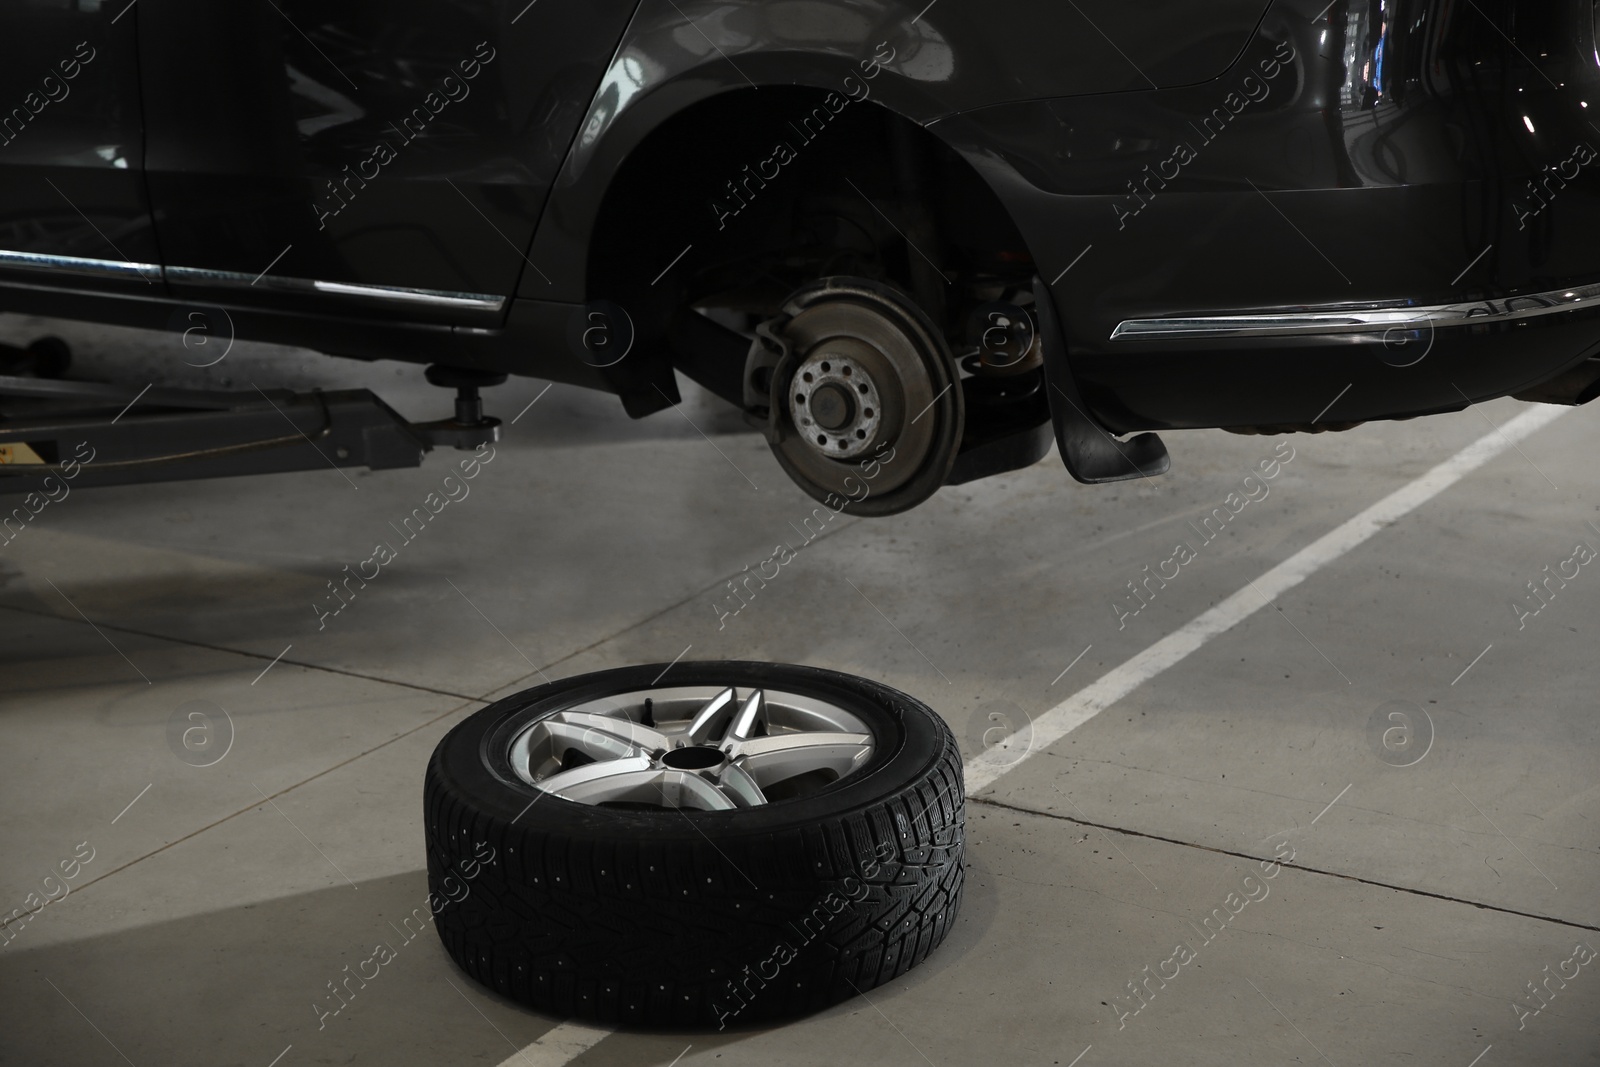 Photo of Wheel on floor near lifted car at automobile repair shop